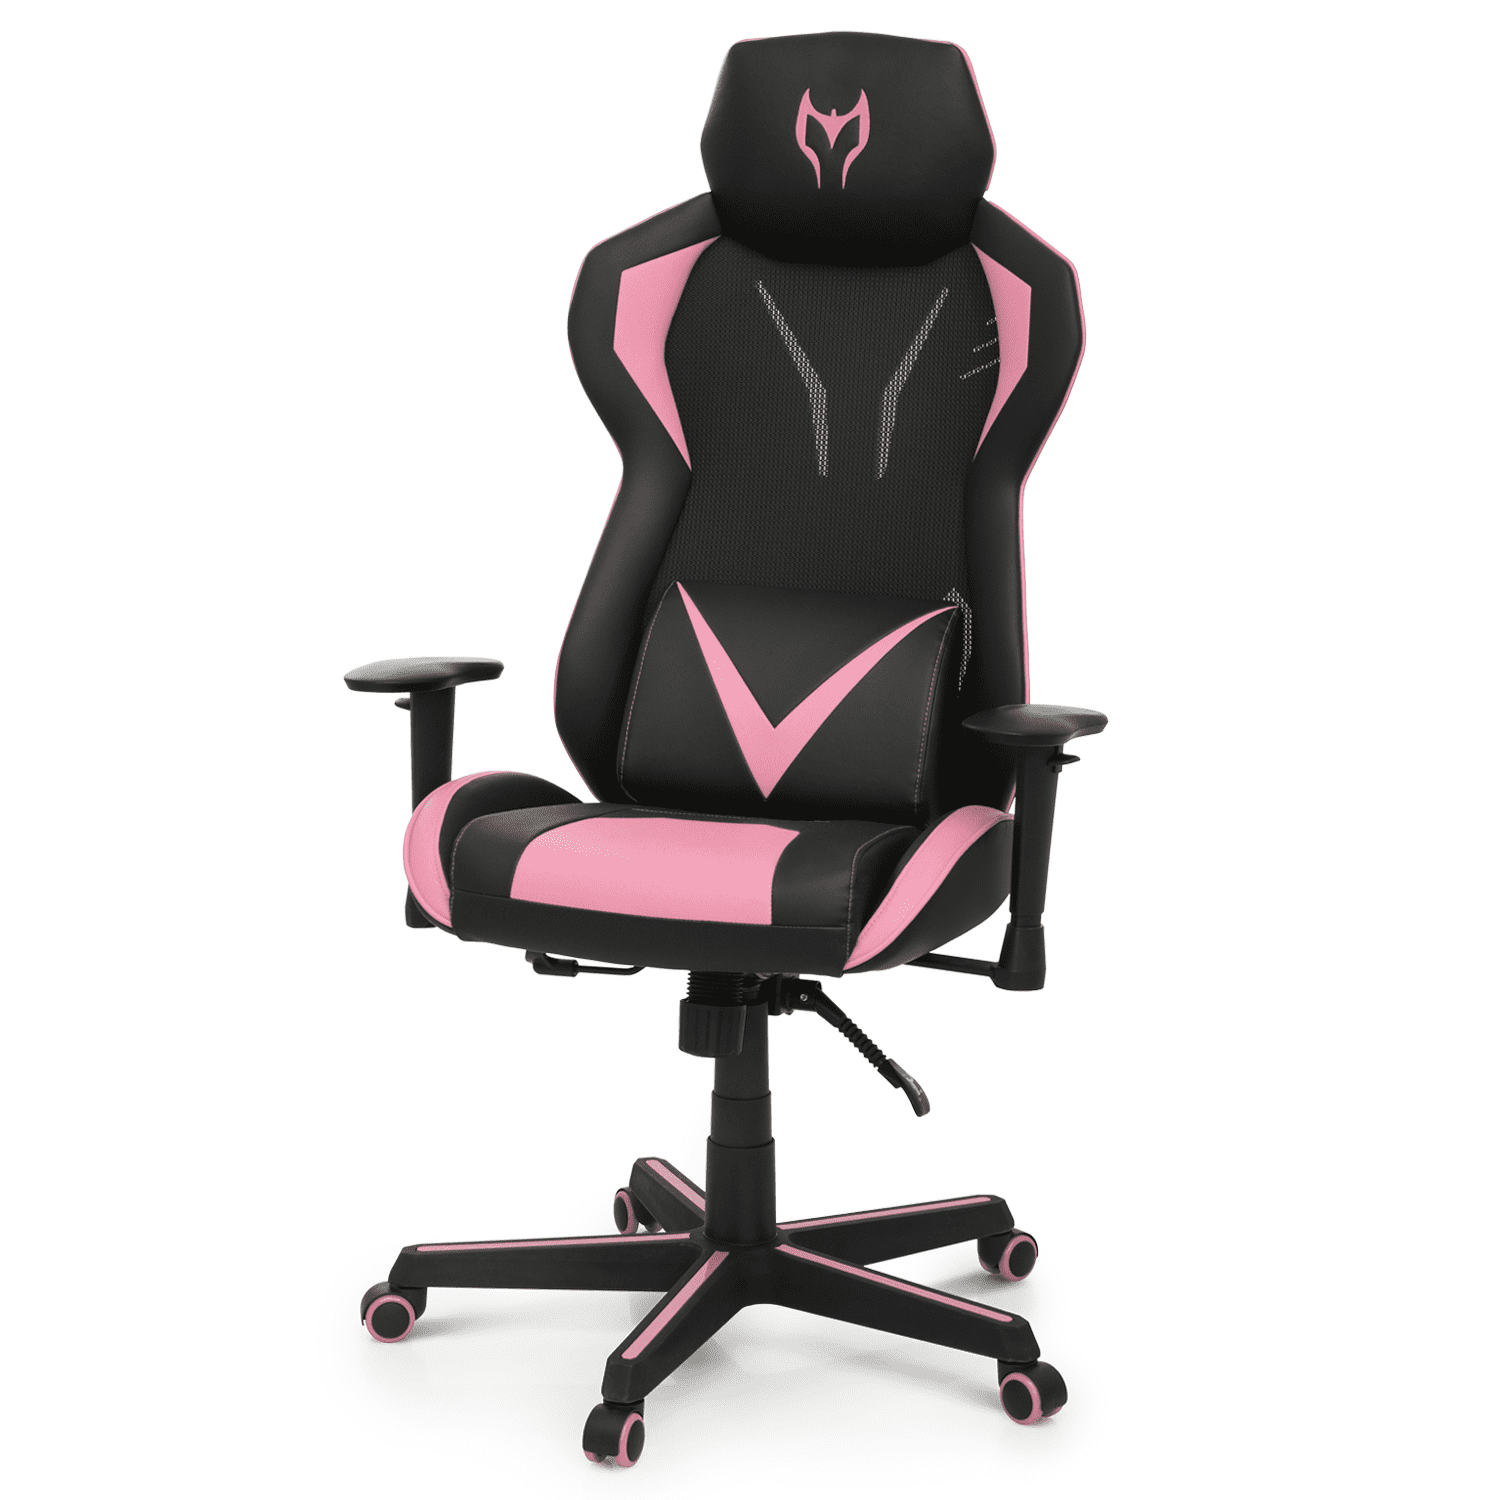 Cute Kitty Ear Gaming Chair Footrest Reclining Seat - Dubsnatch